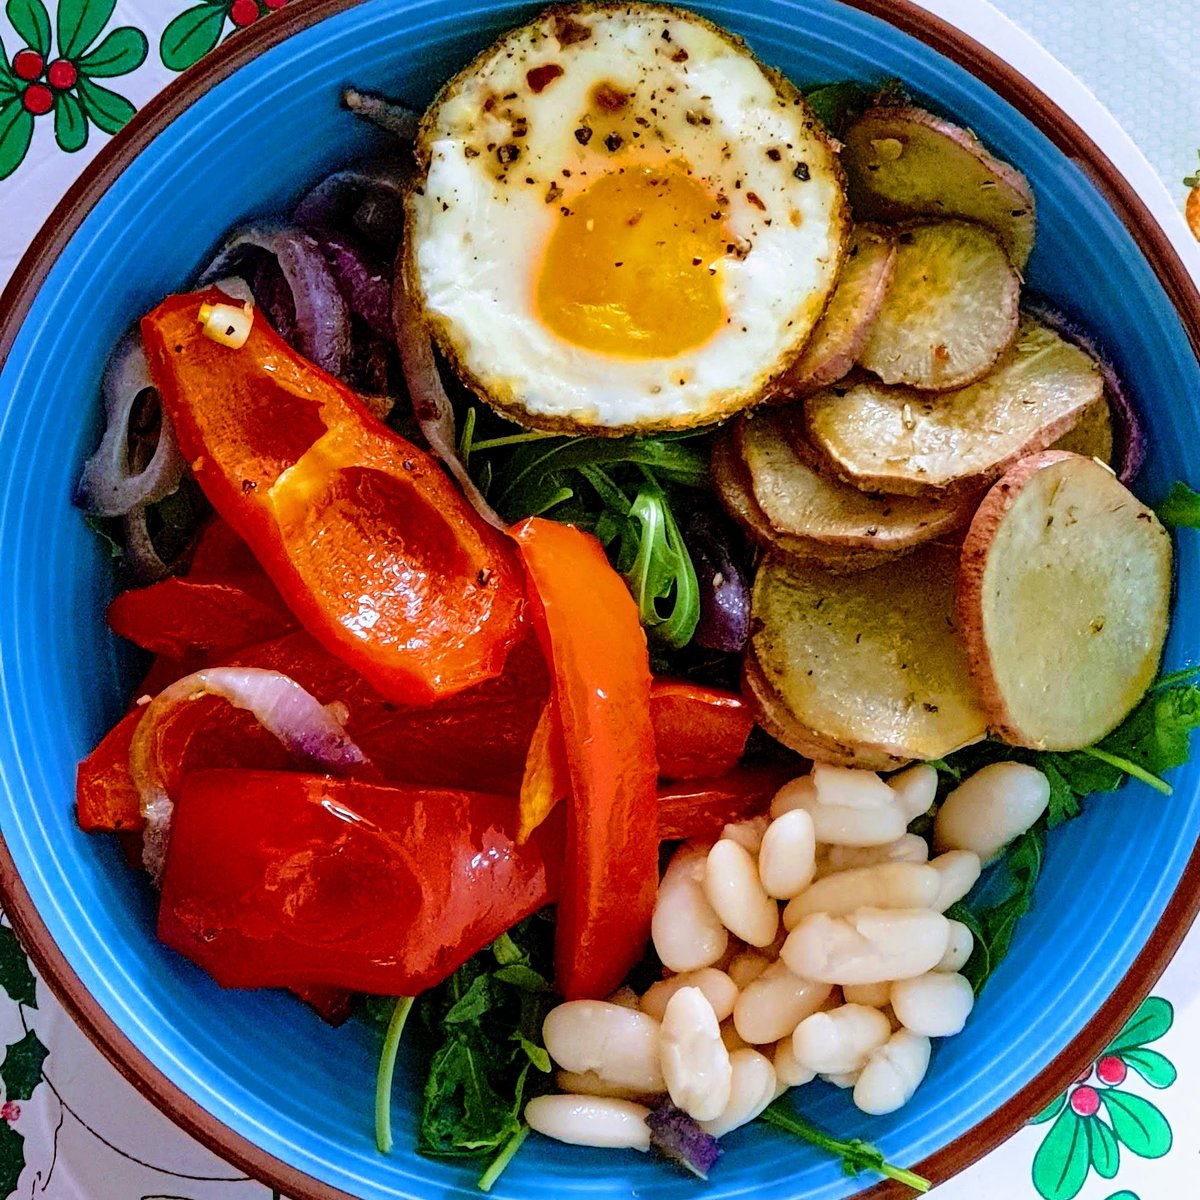 Roasted veggie salad with sweet potato coins, red bell pepper, beans and oven baked eggs in a muffin tin #foodNERDS